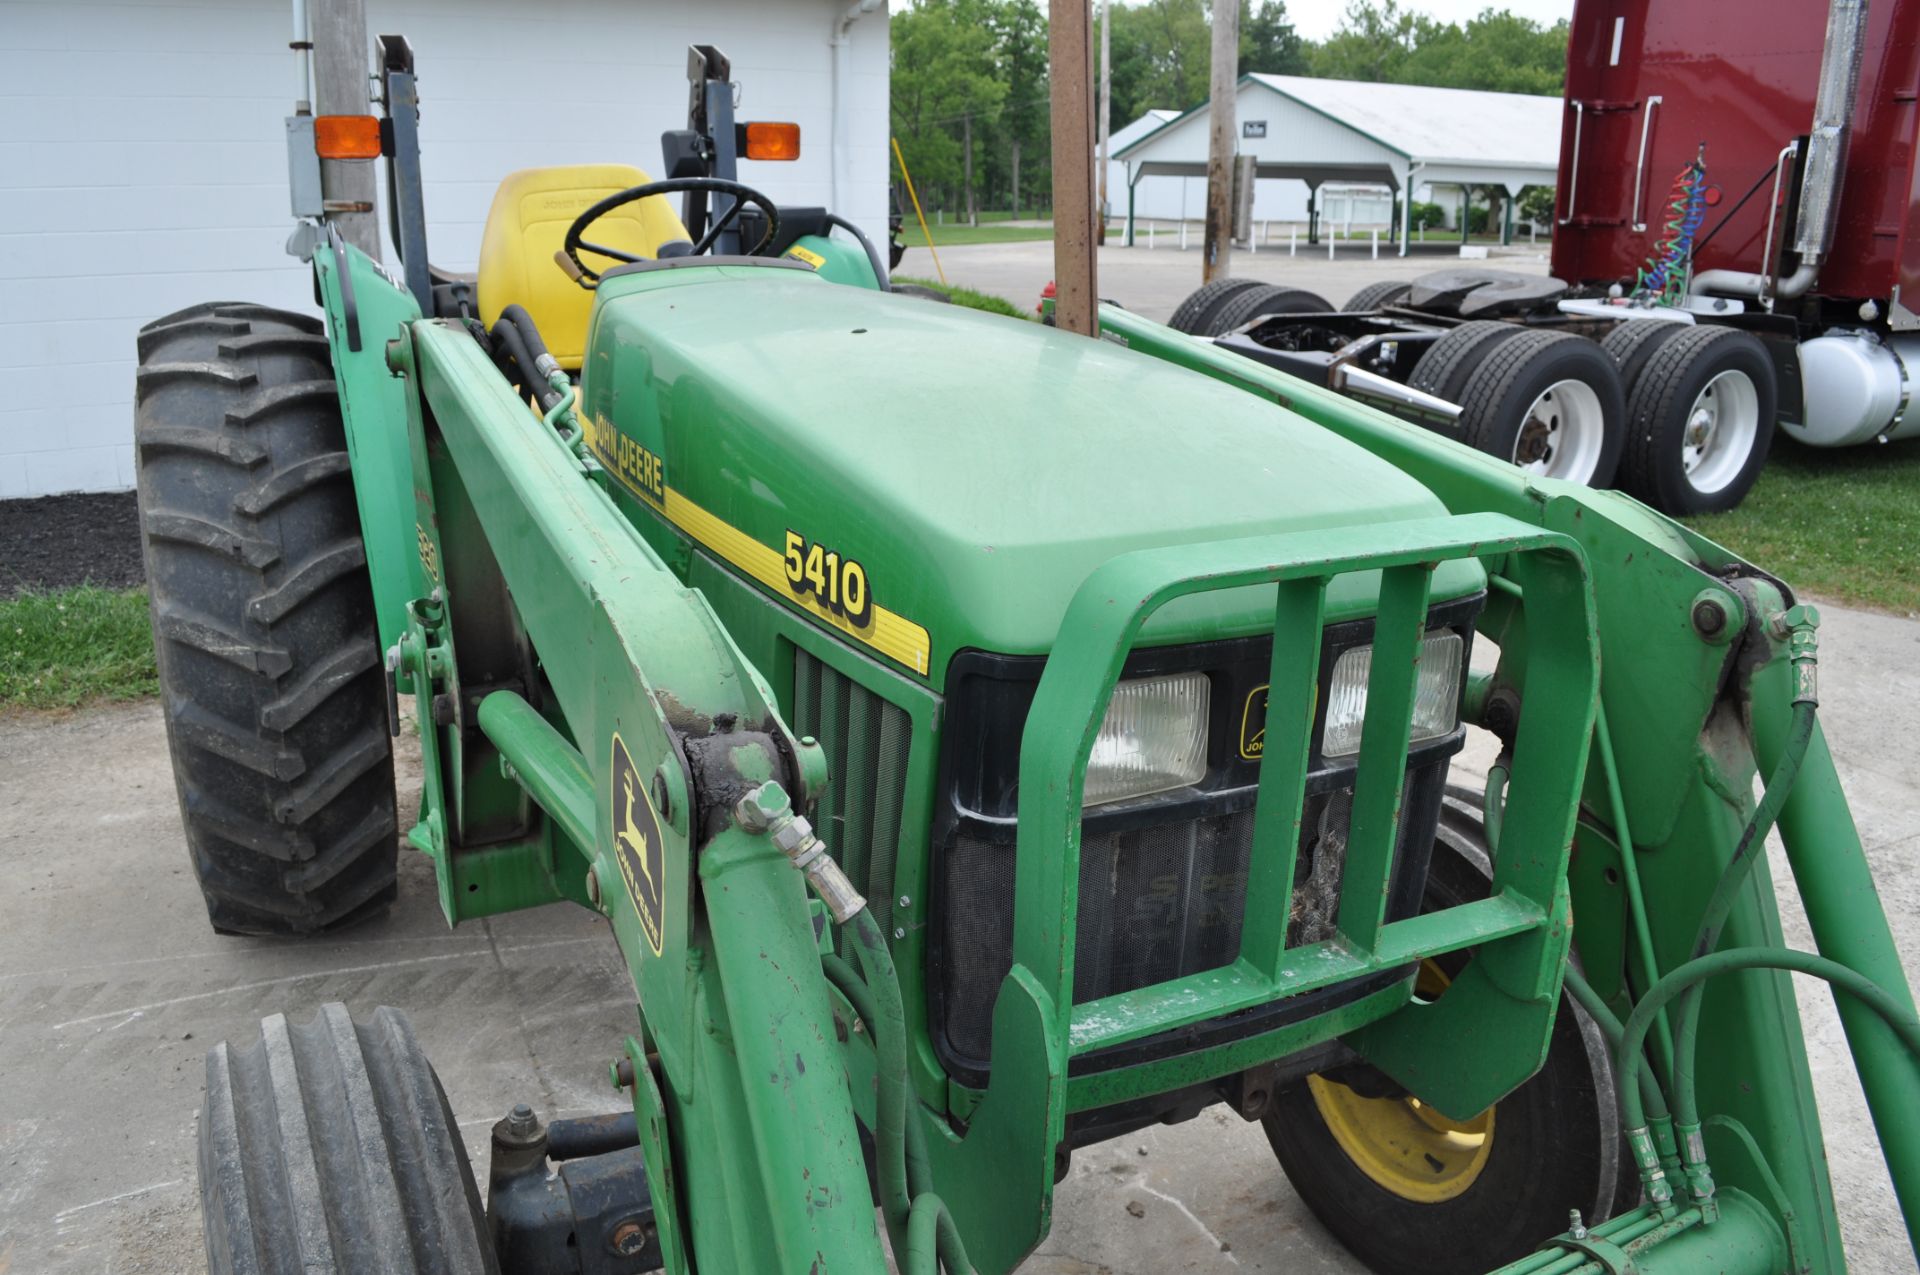 John Deere 5410 tractor, 2WD, w/ 520 loader, 16.9-30 rear tires, 11 L 15.5 front tires, 4090 hrs - Image 10 of 15